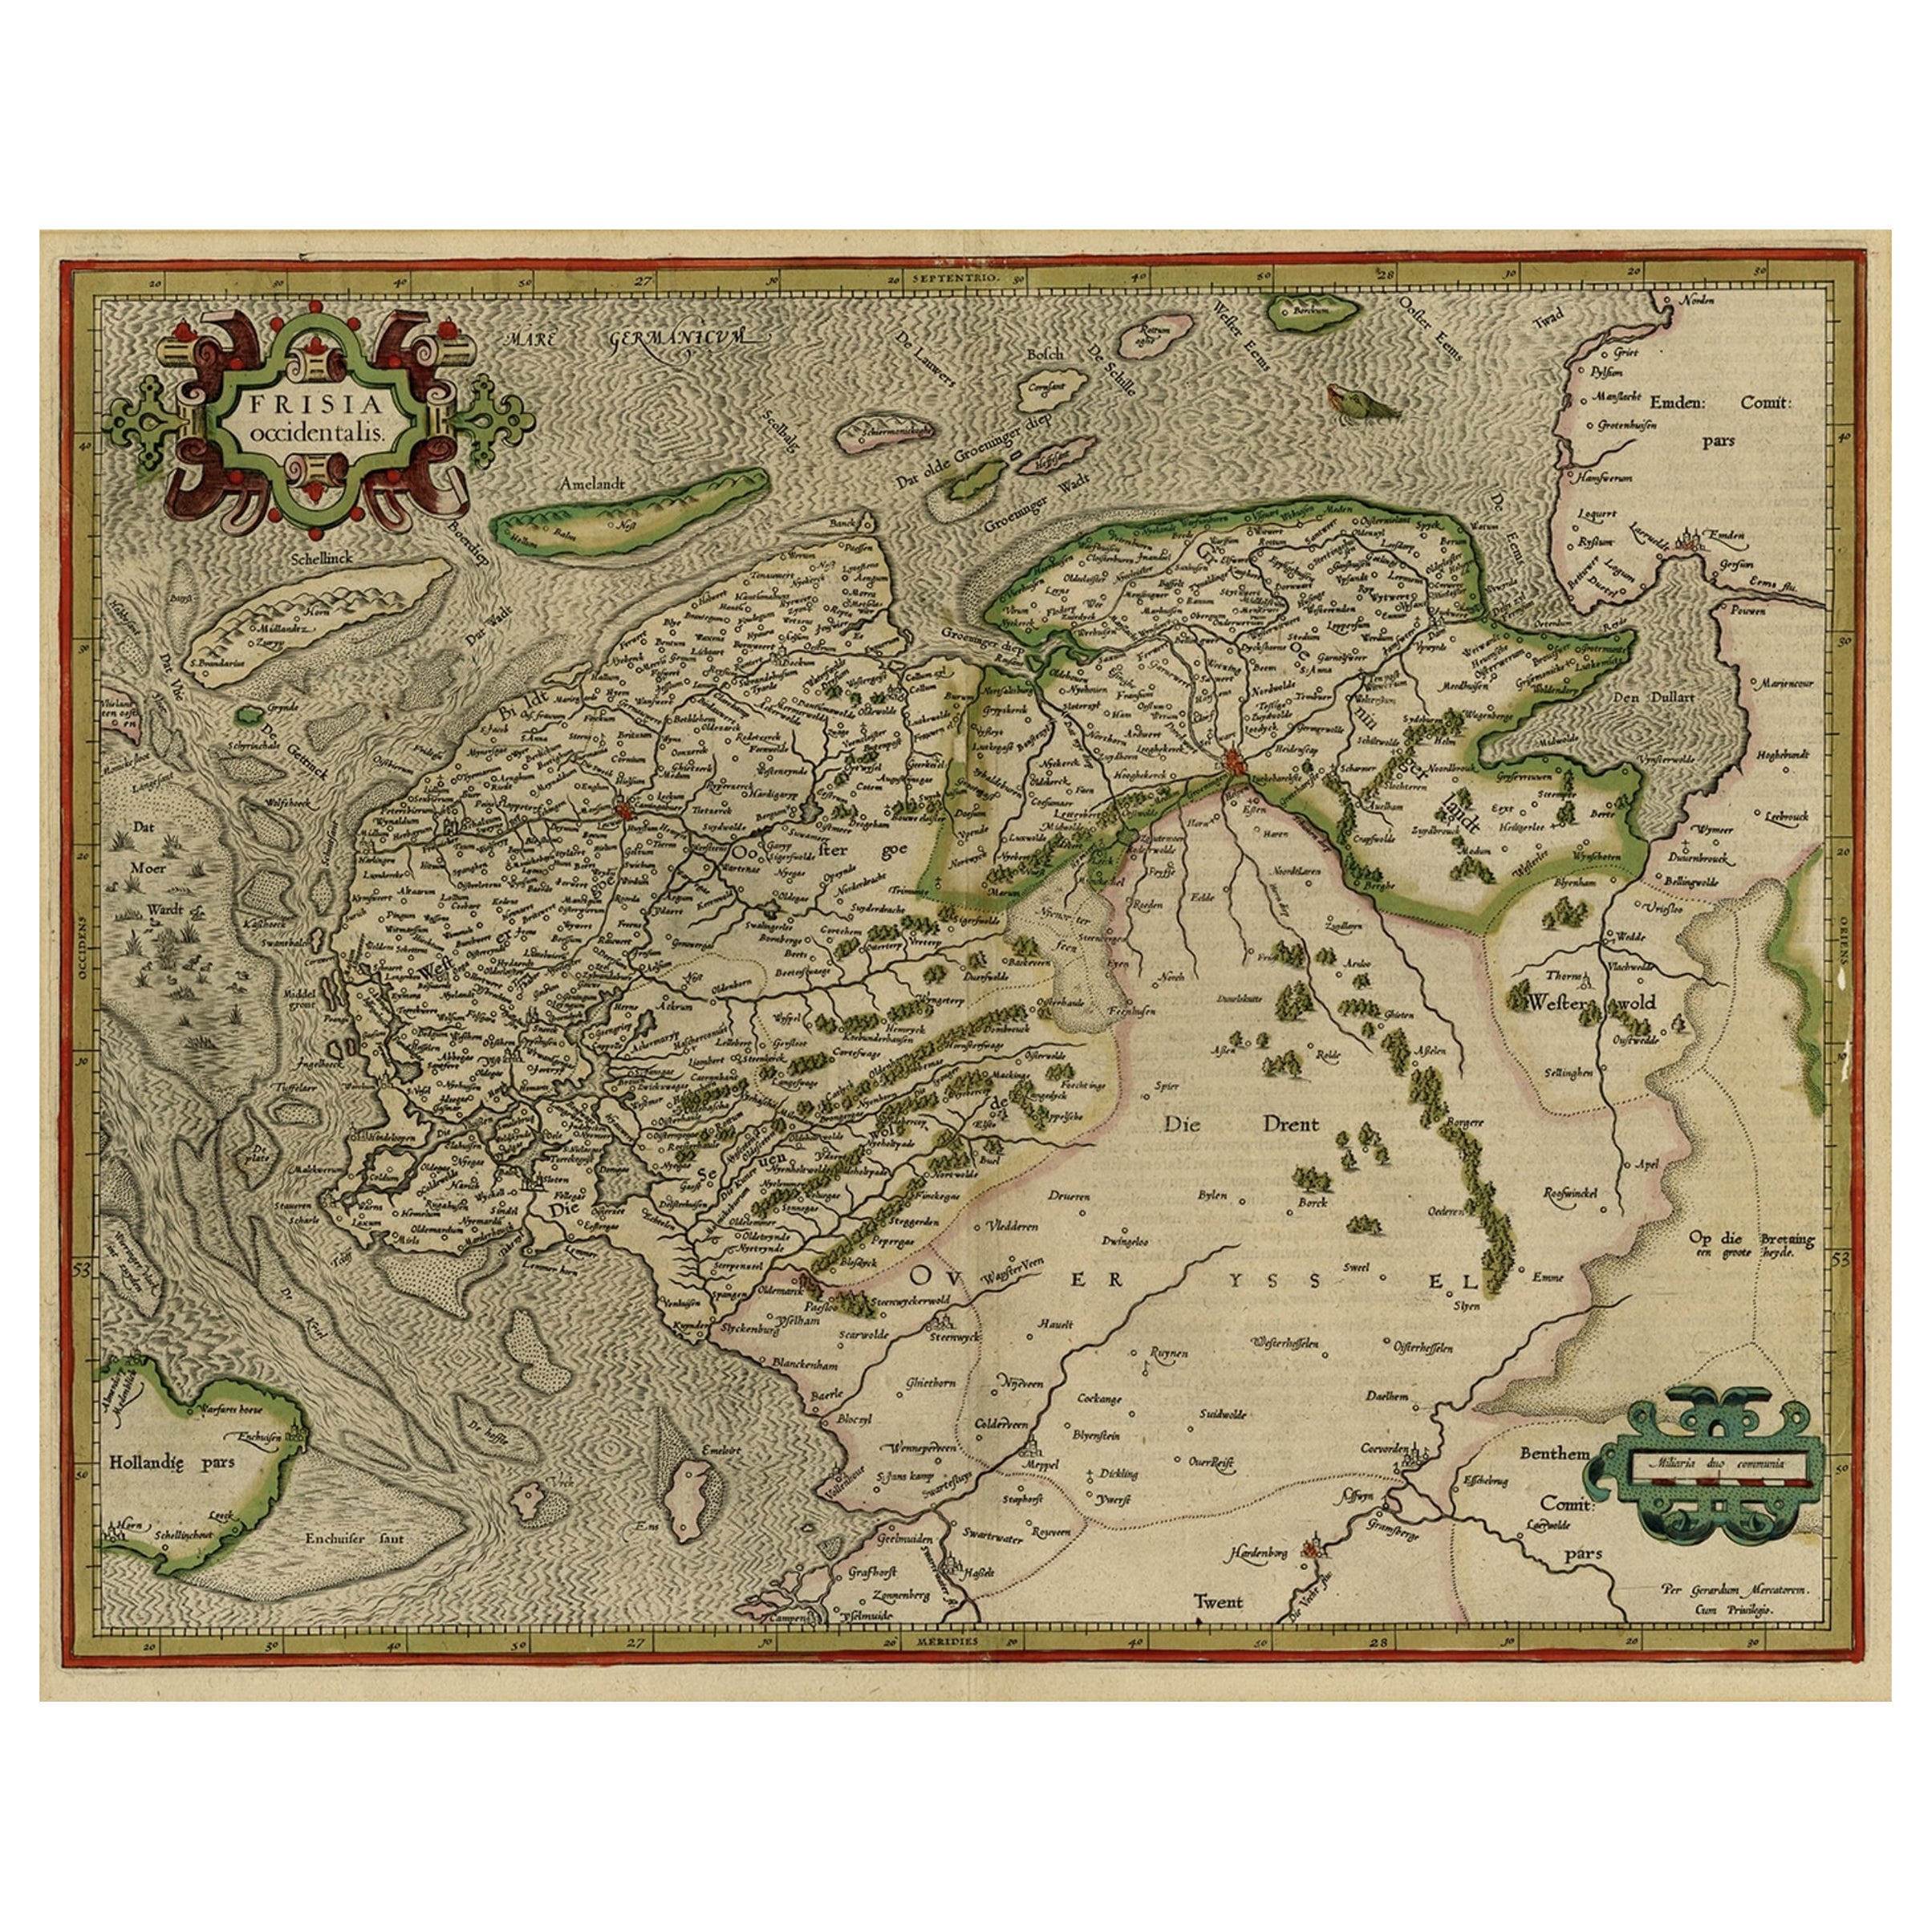 Early Antique Map of the Dutch Provinces of Friesland and Groningen, 1604